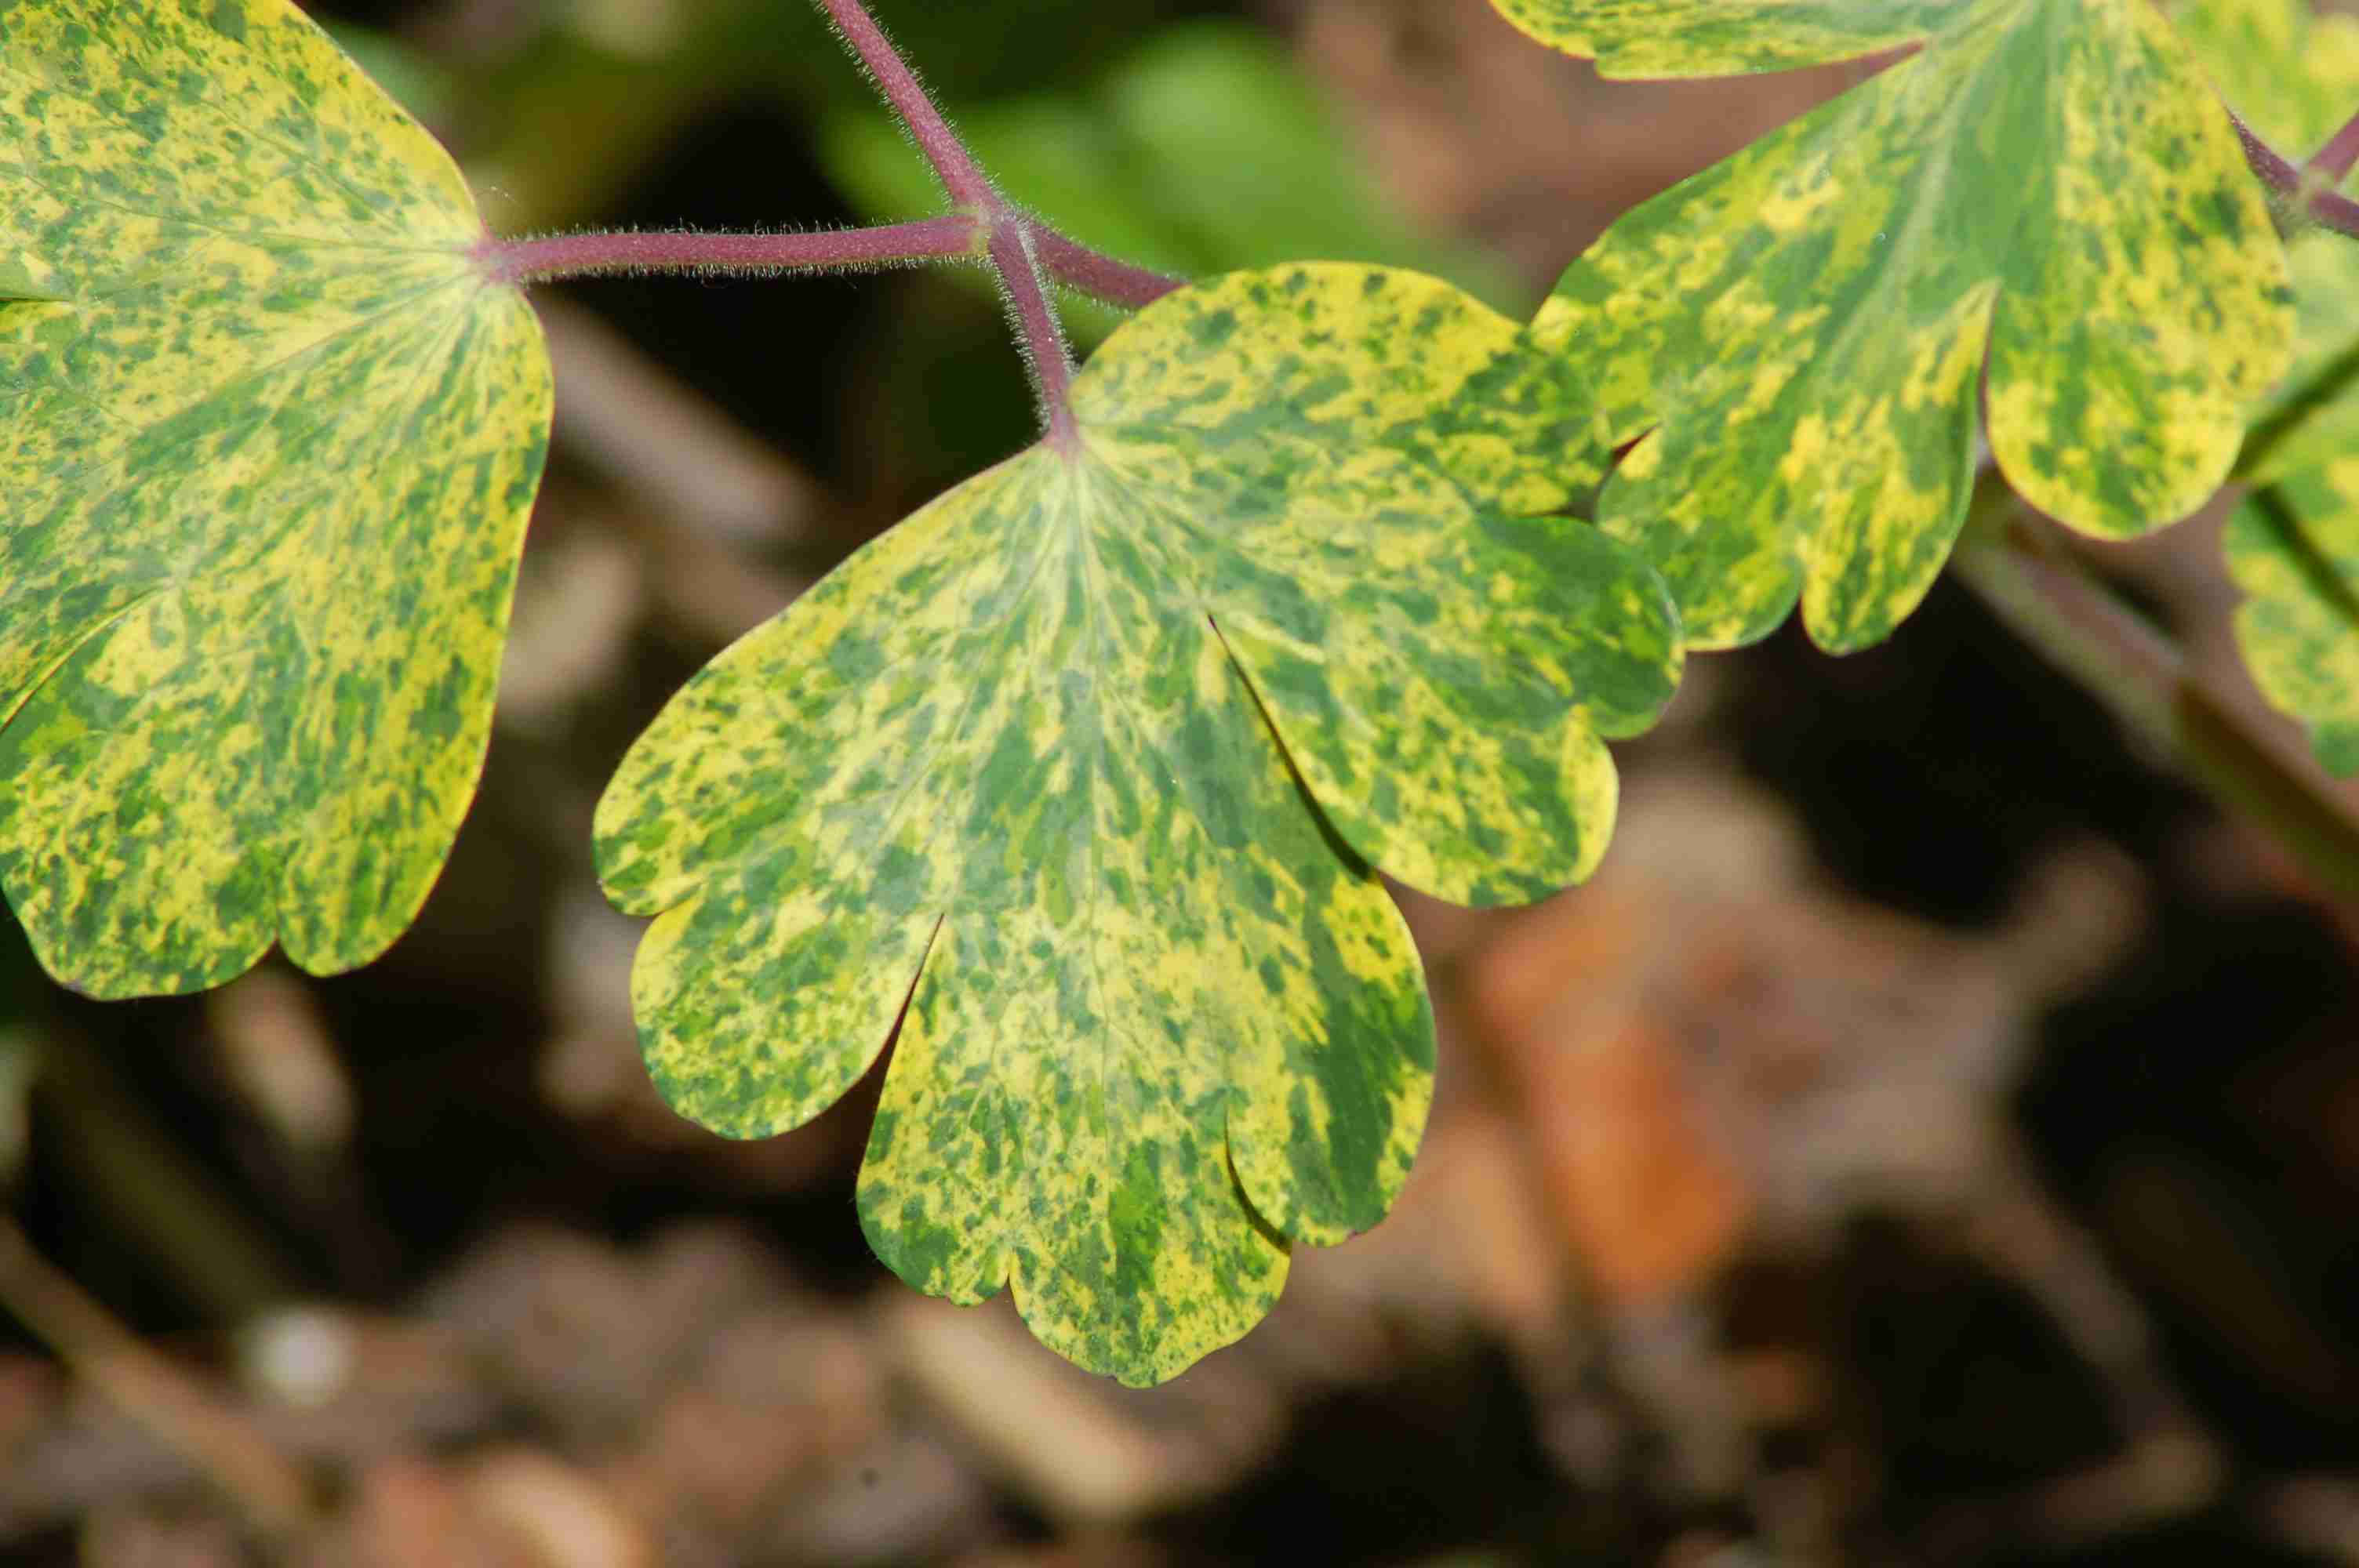 Variegated Leaves: Pictures of Bi-Colored Plants